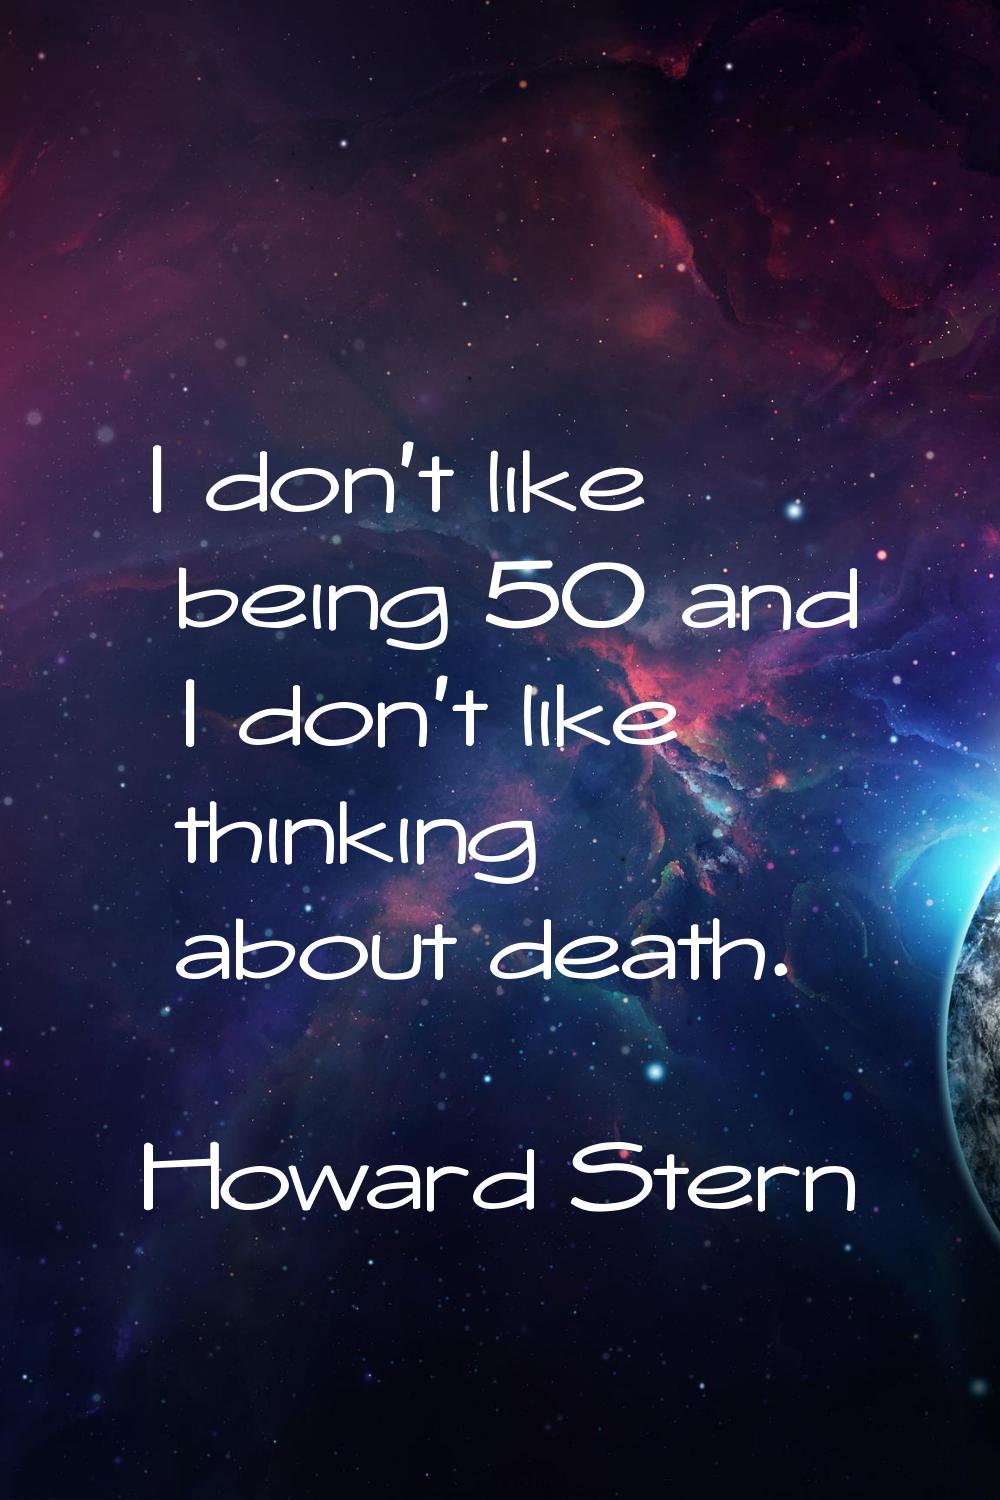 I don't like being 50 and I don't like thinking about death.